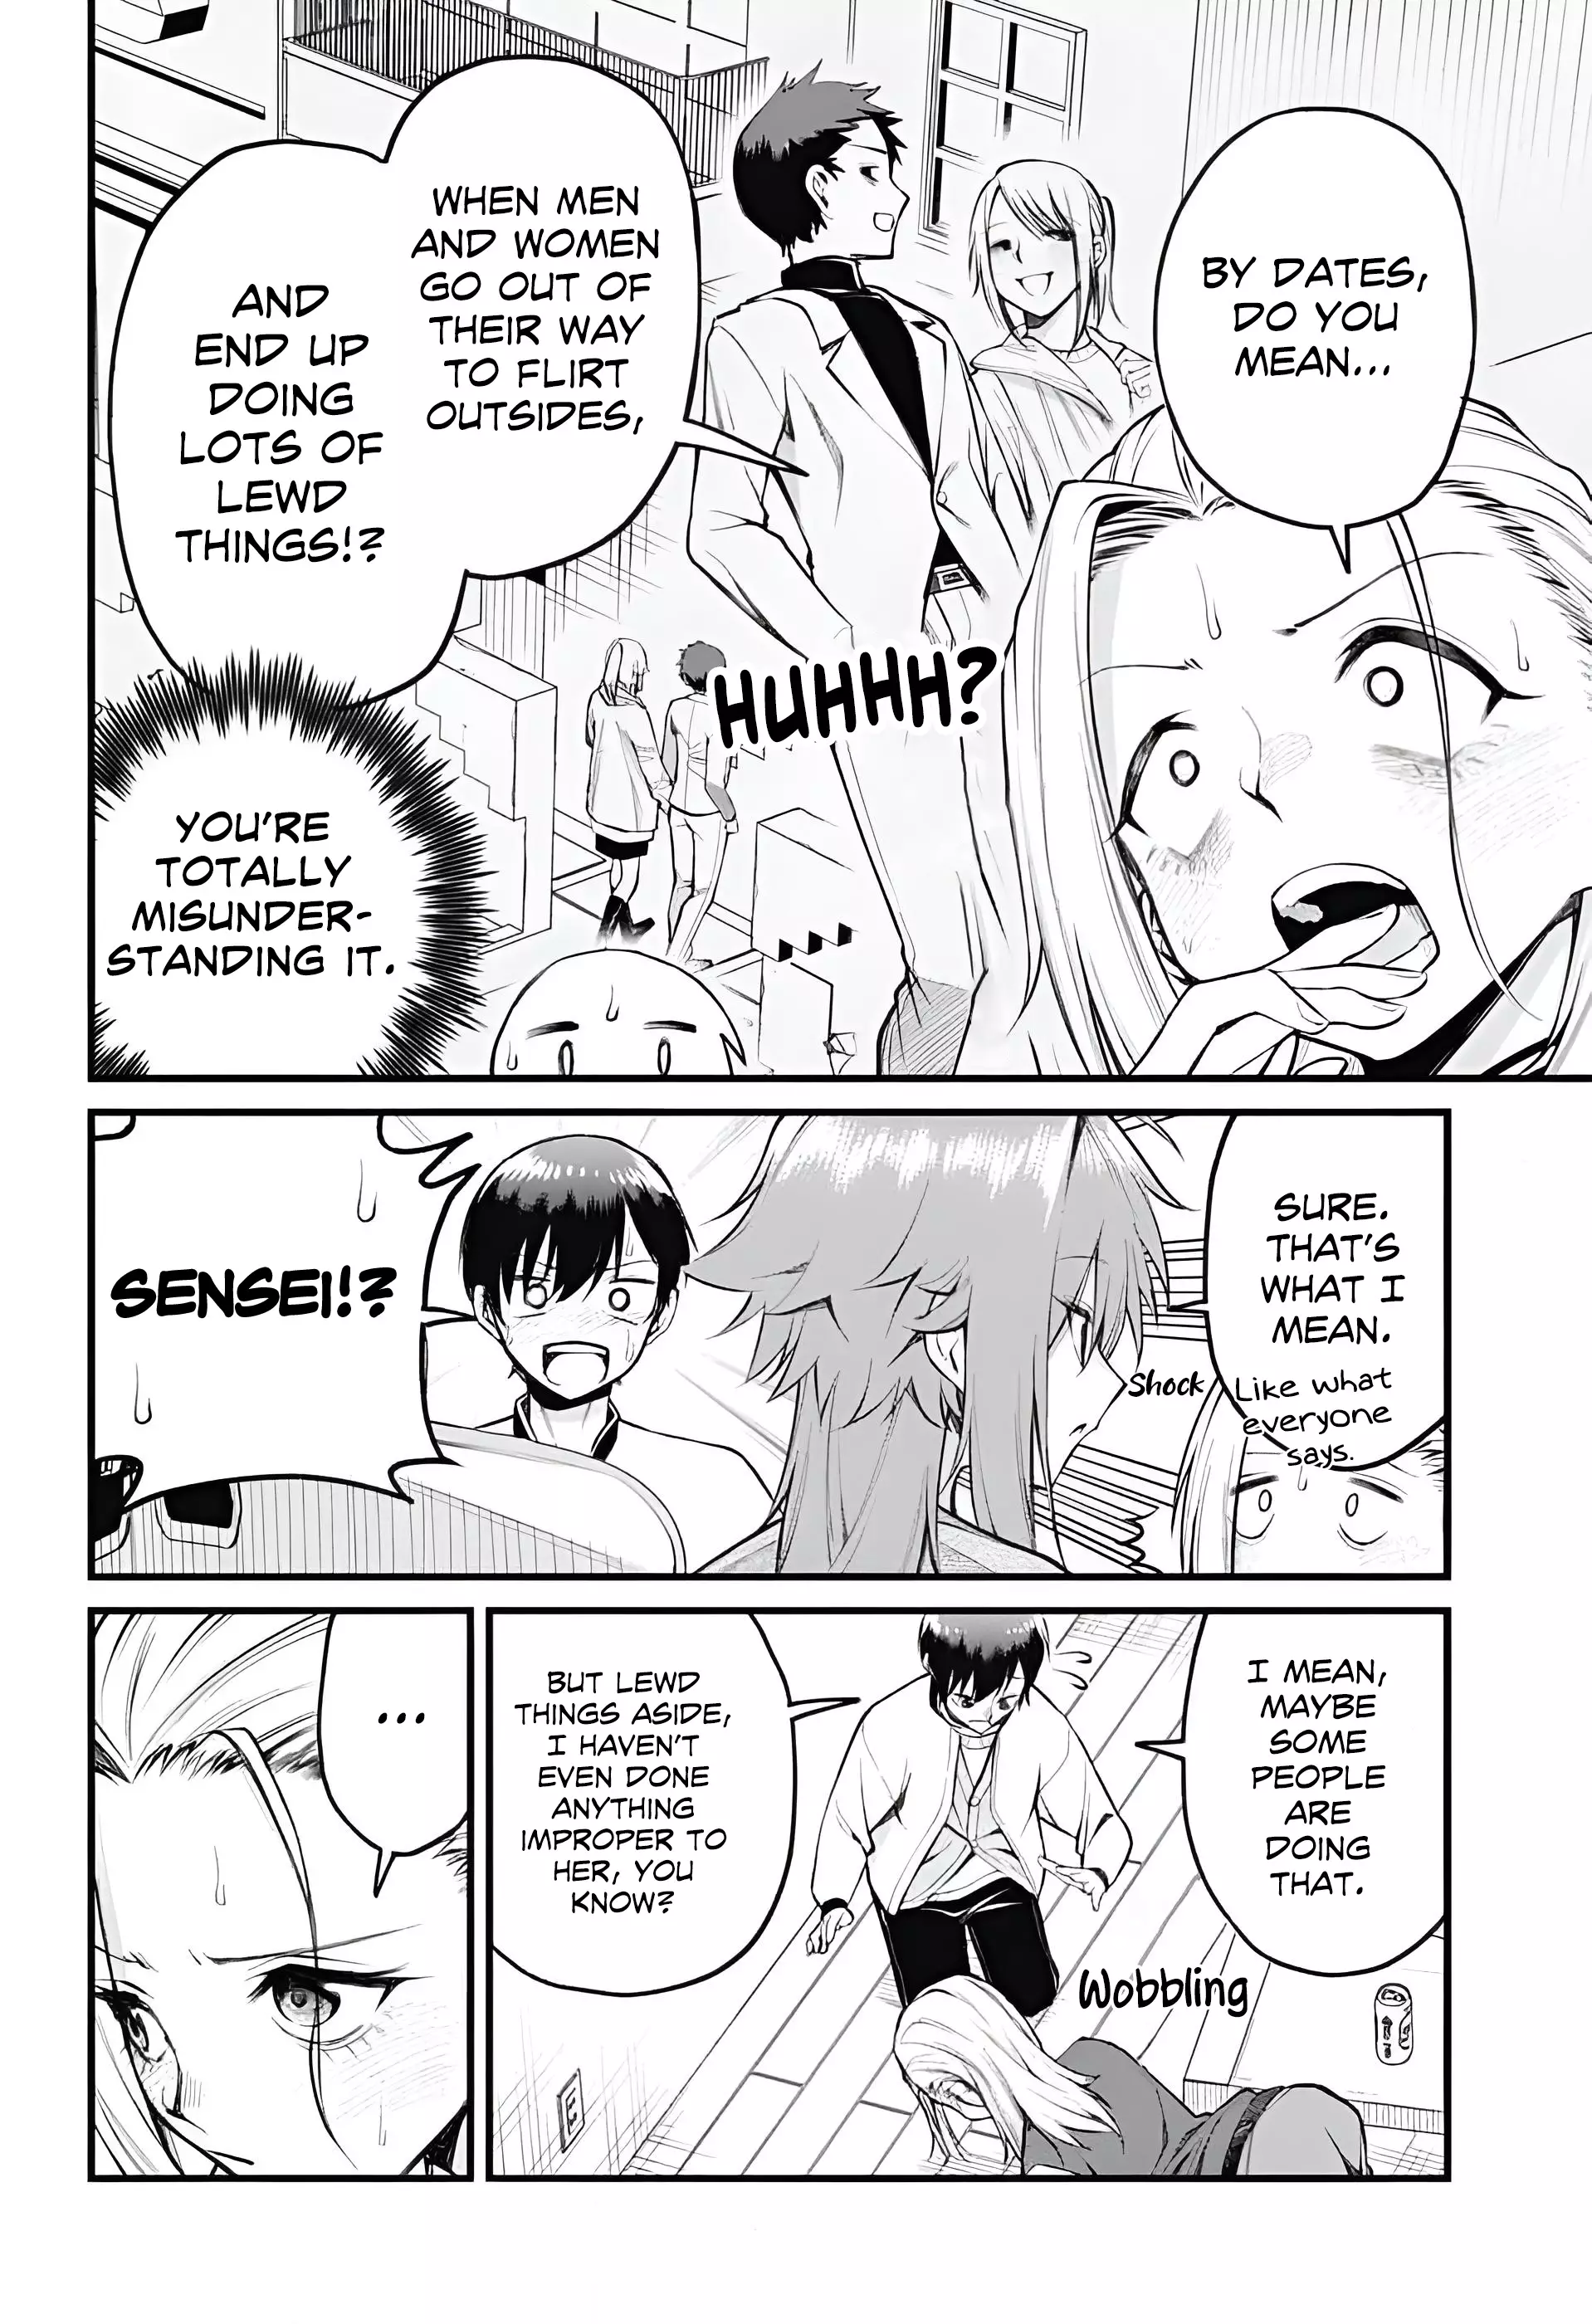 Akanabe-Sensei Doesn't Know About Embarrassment - 8 page 8-1029a223